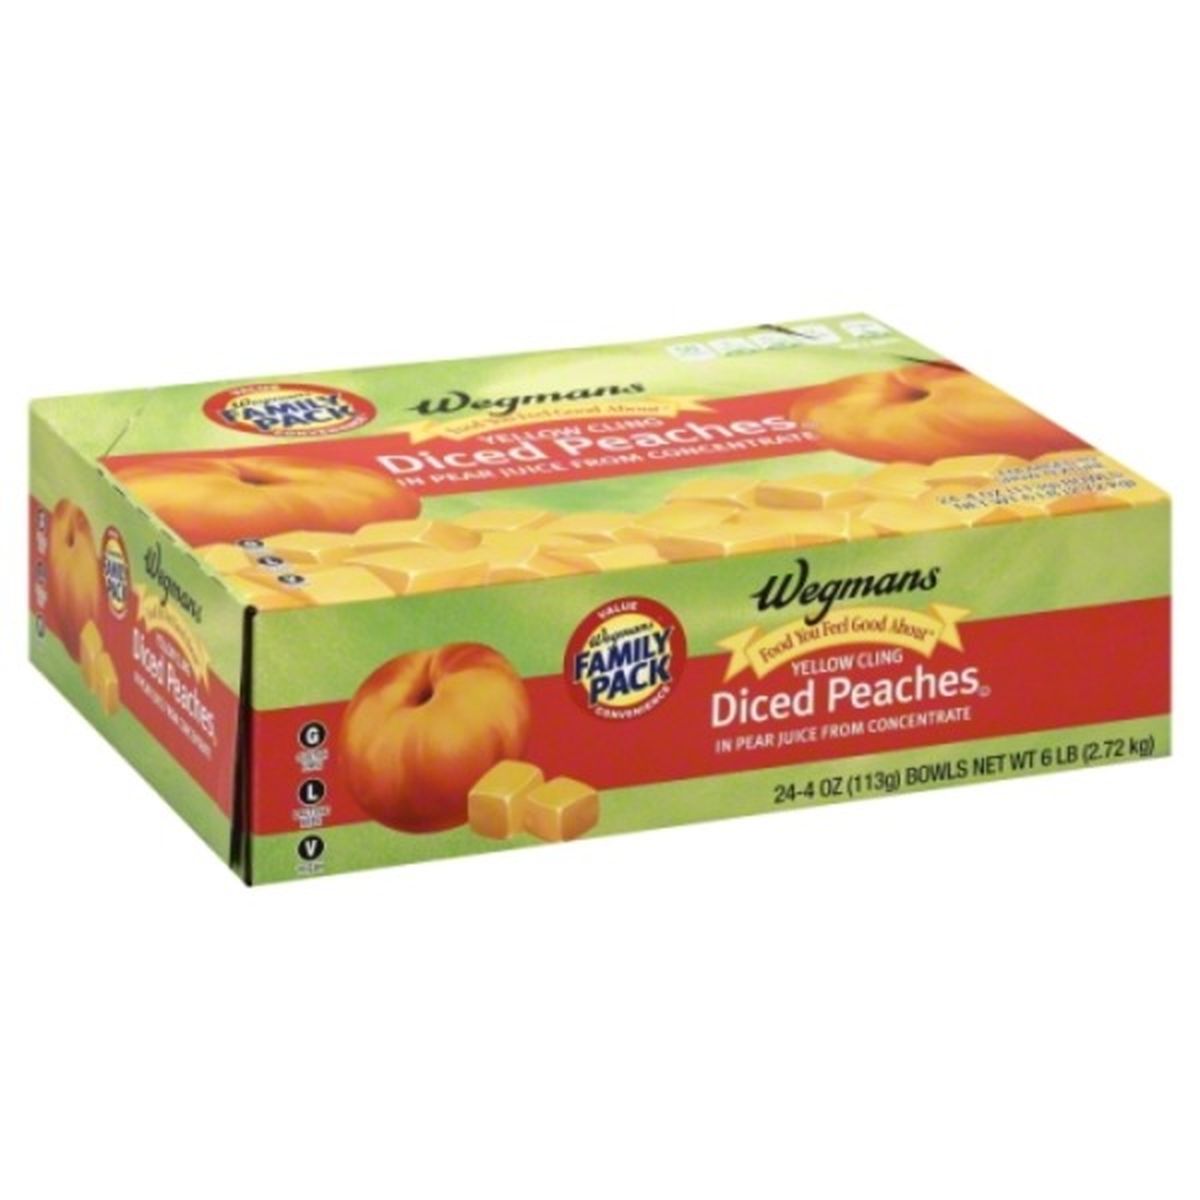 Calories in Wegmans Yellow Cling Diced Peaches, FAMILY PACK